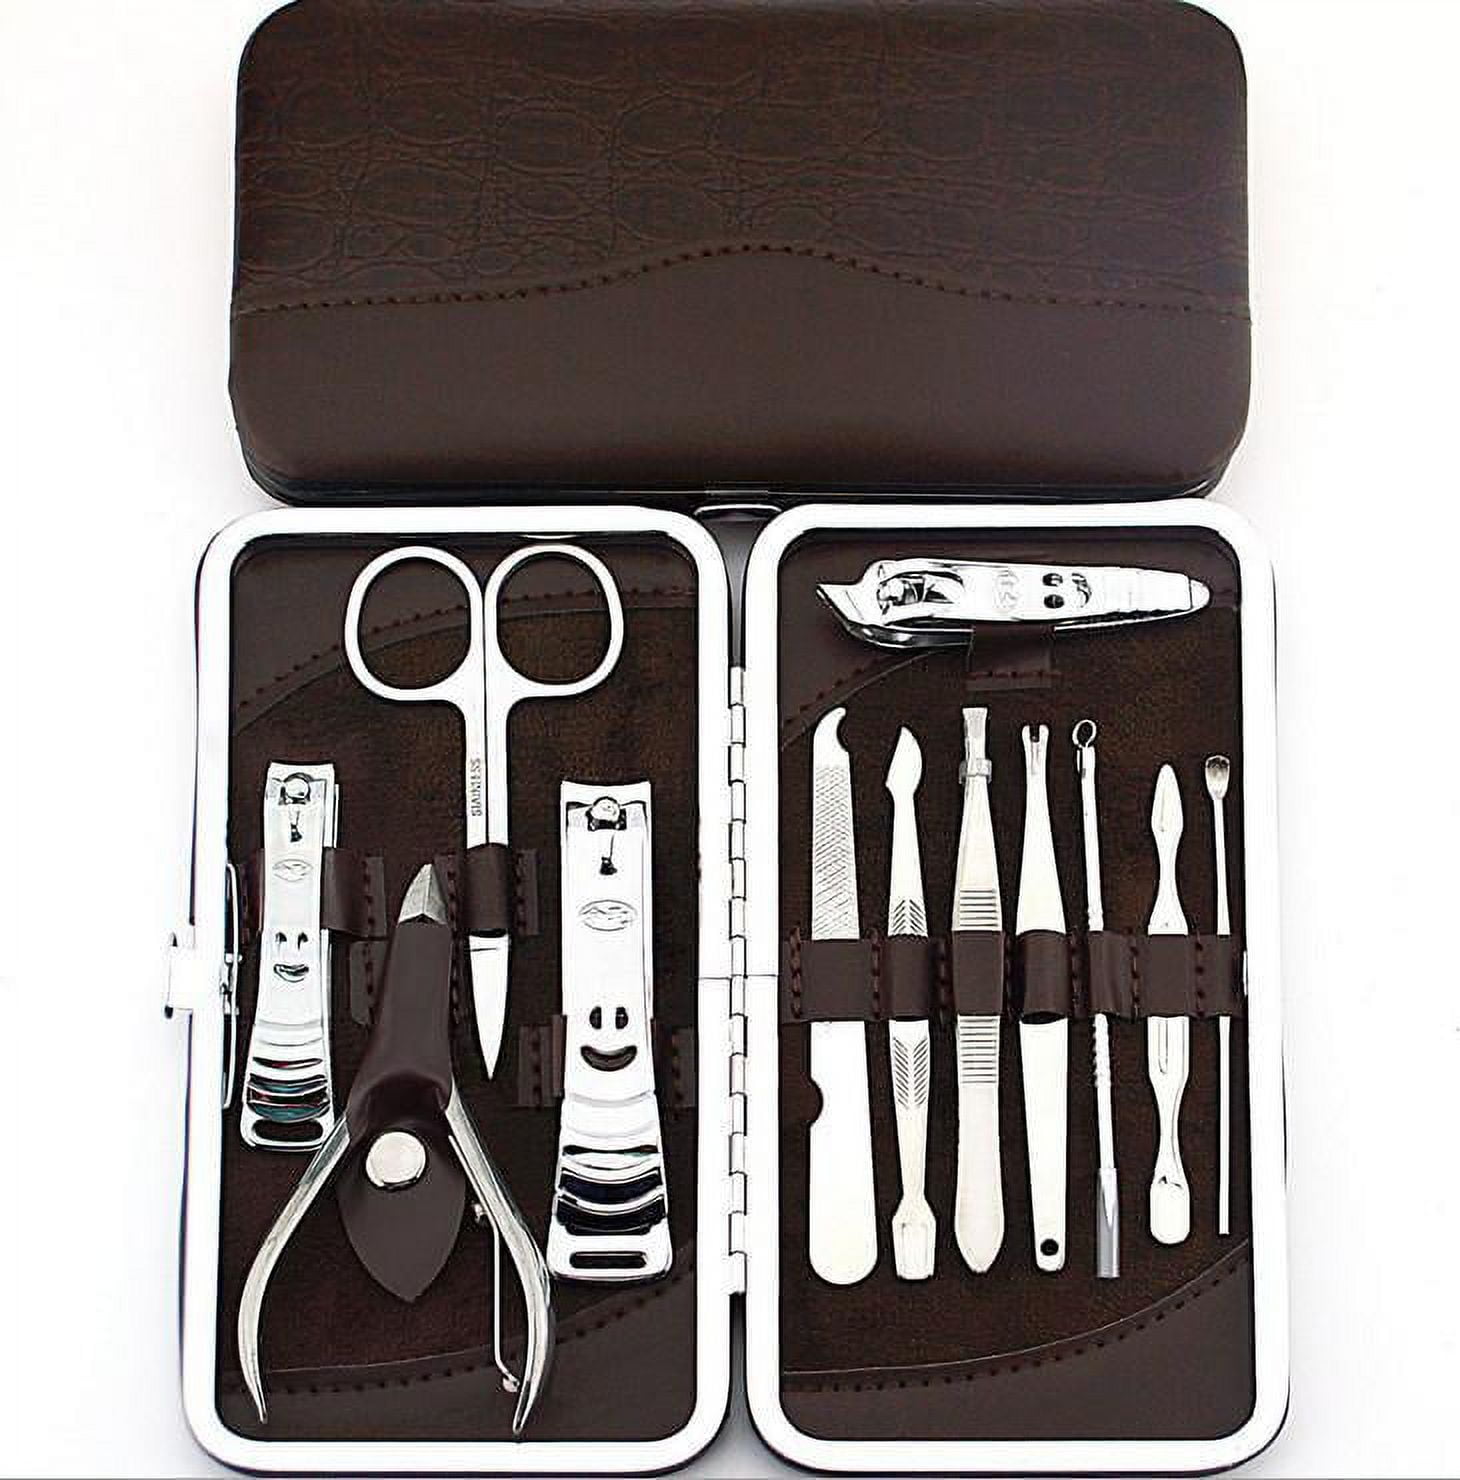 JamBer Manicure Set 15 in 1 Stainless Steel Professional Nail Clippers  Scissors Pedicure Set Grooming Kit for Thick Nails Cuticle Remover Toe Nail  Toenail Care Travel Tool Kit Gift for Mother's Day